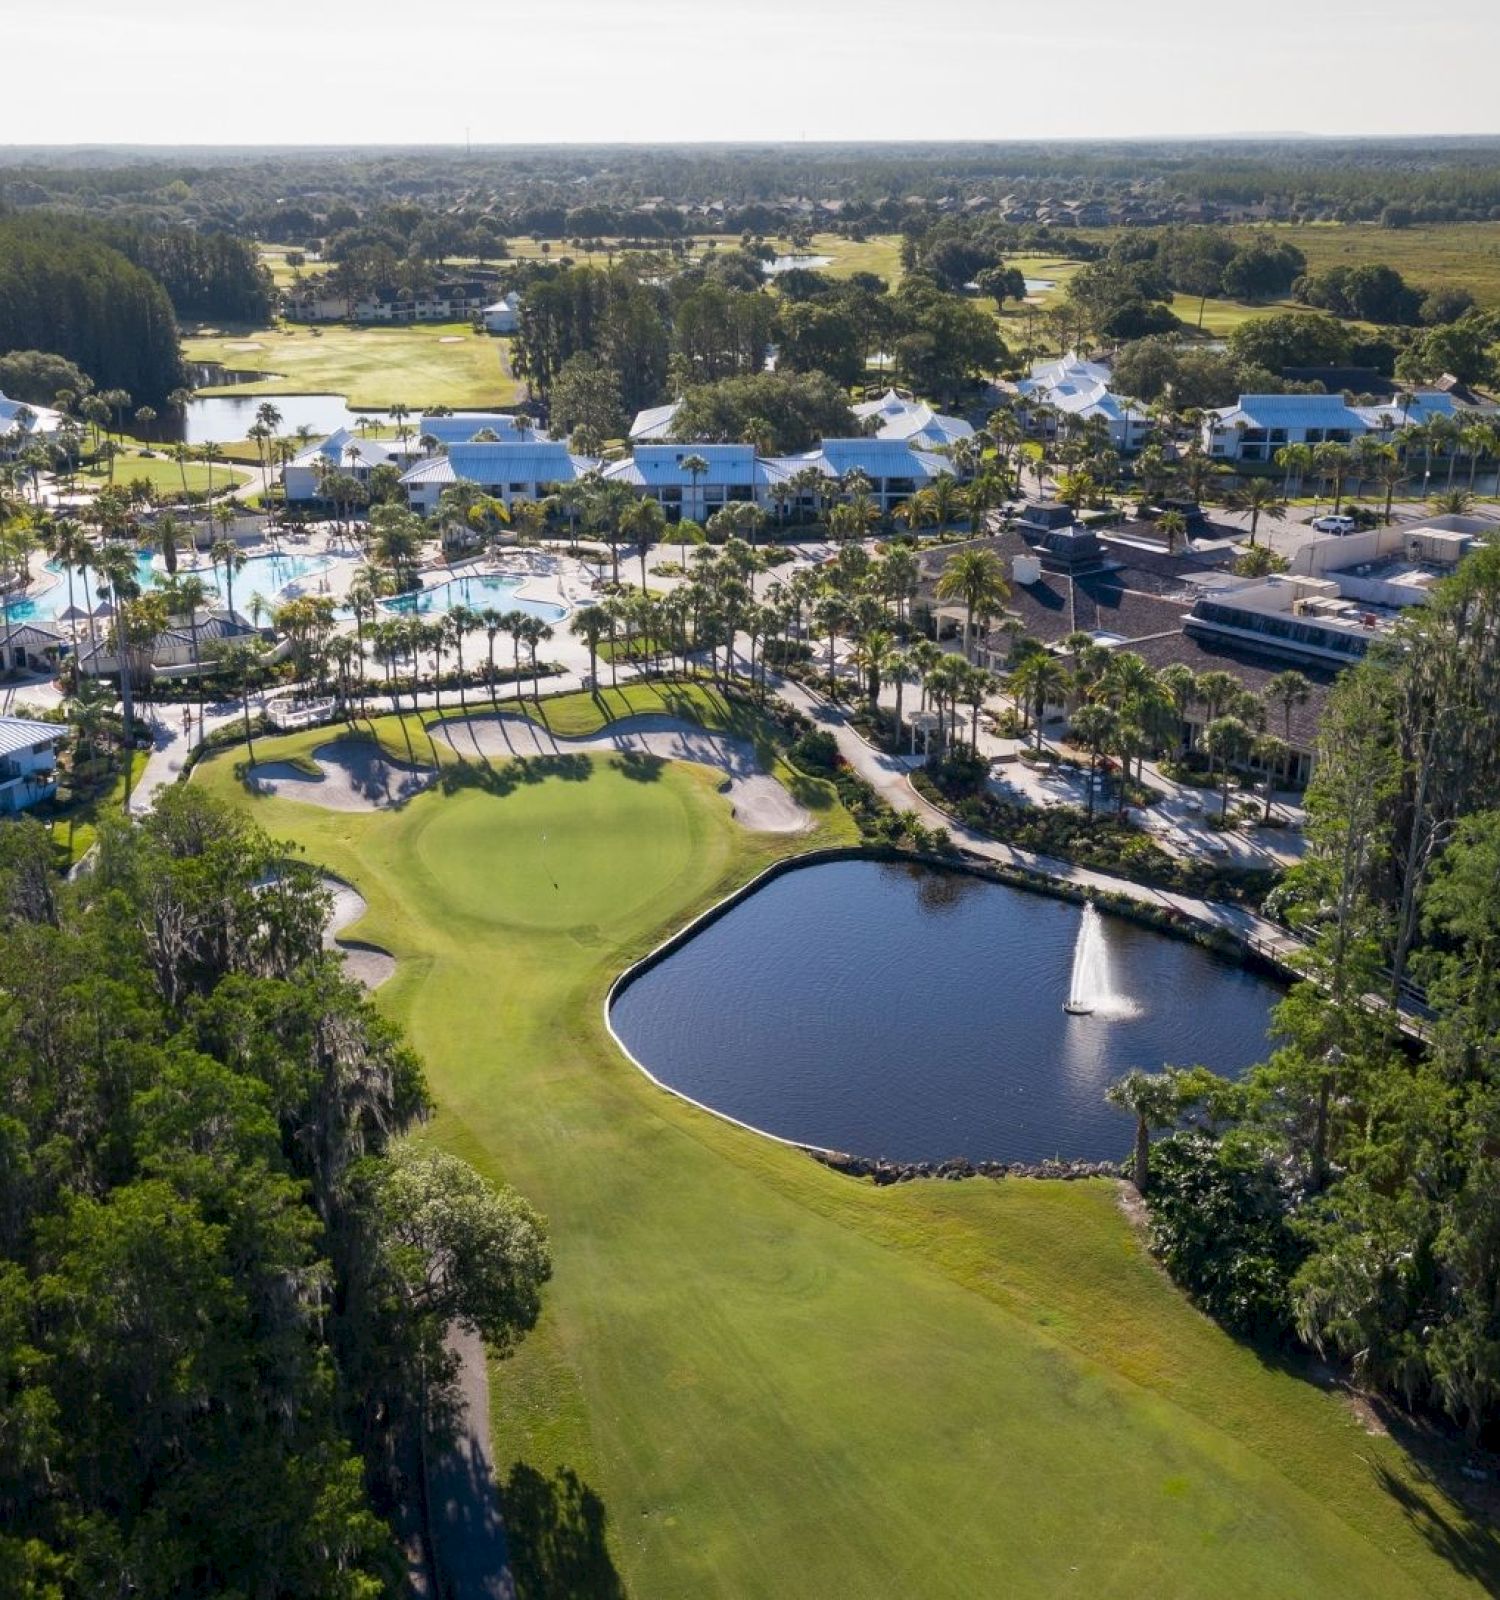 The image shows an aerial view of a golf course with a water feature, surrounded by buildings and greenery, extending to the horizon.